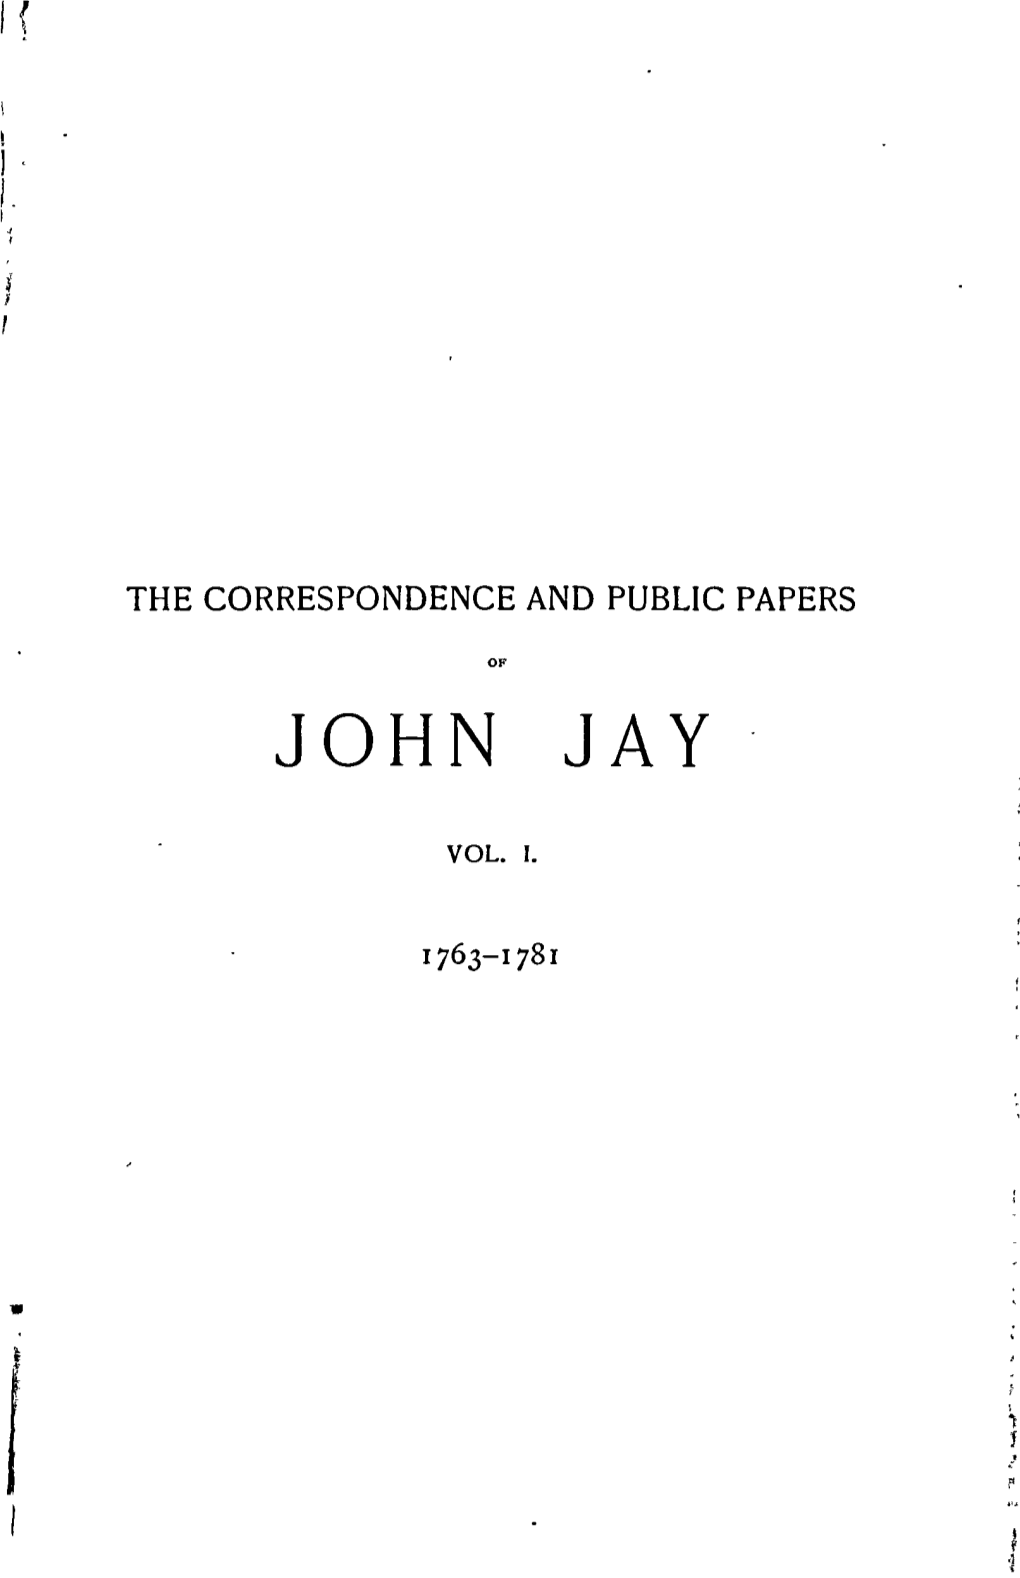 The Correspondence and Public Papers